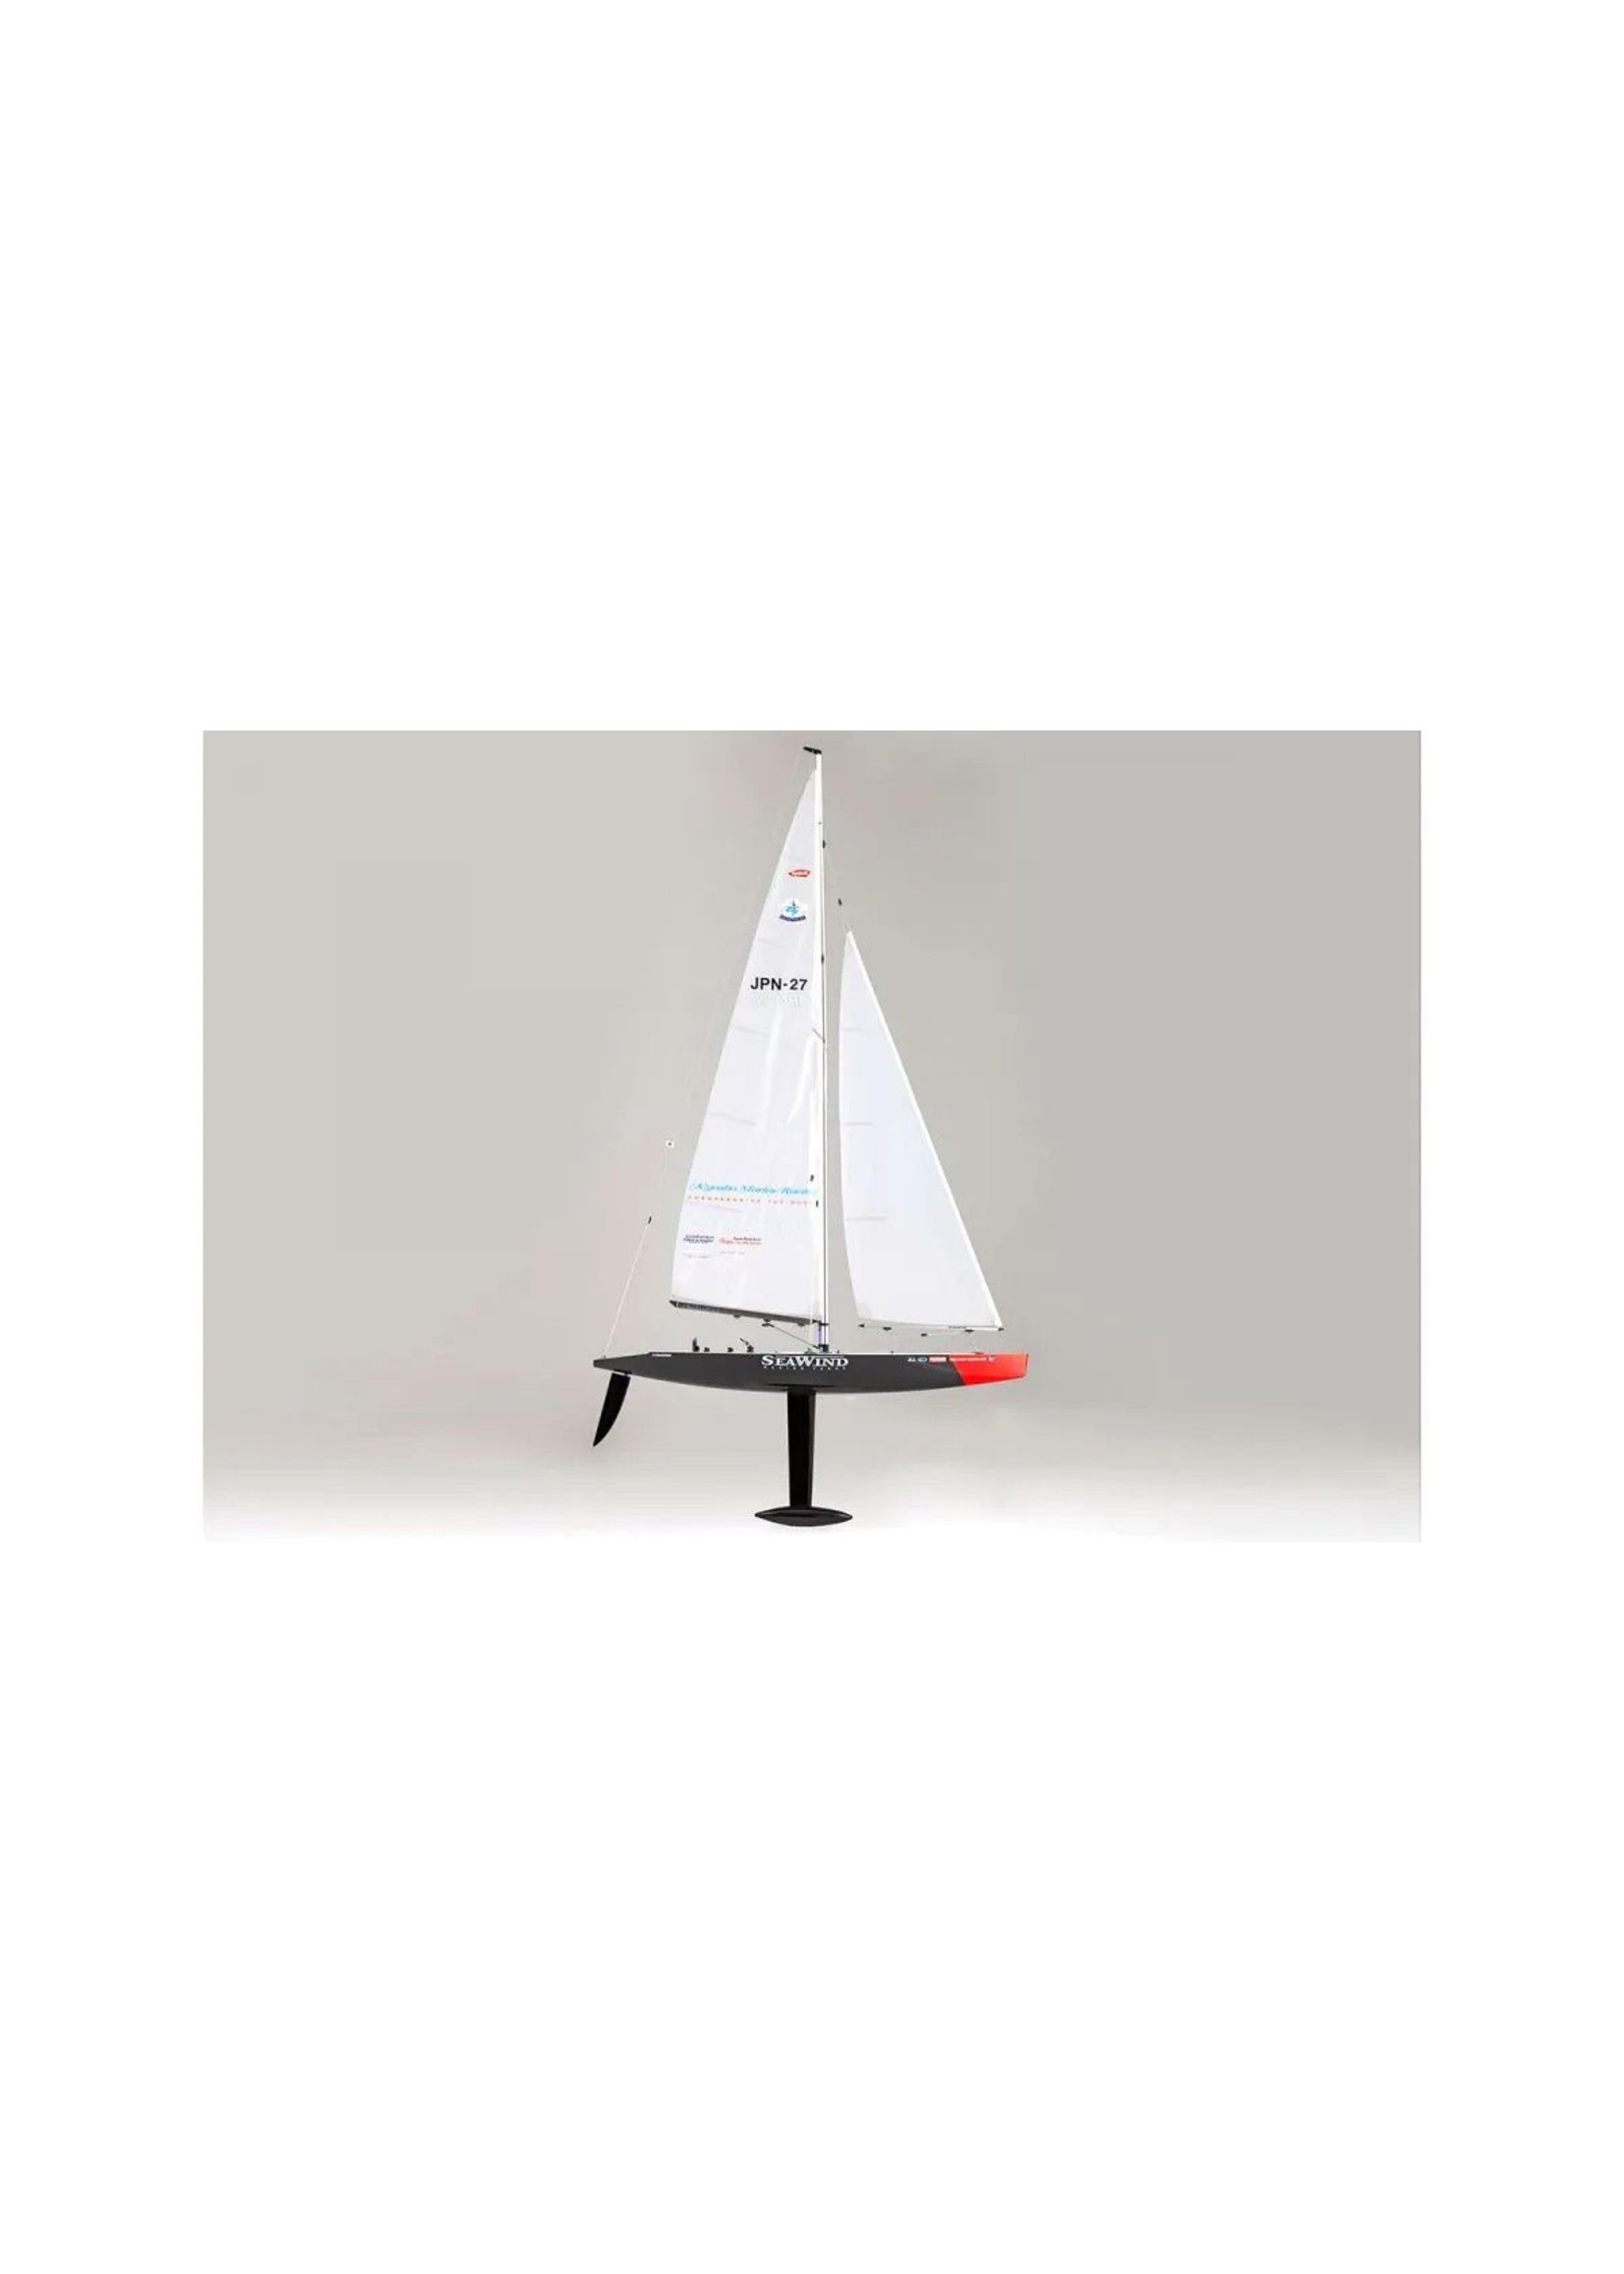 Kyosho 40462ST2 - Seawind Racing Yacht With KT-431S - Readyset